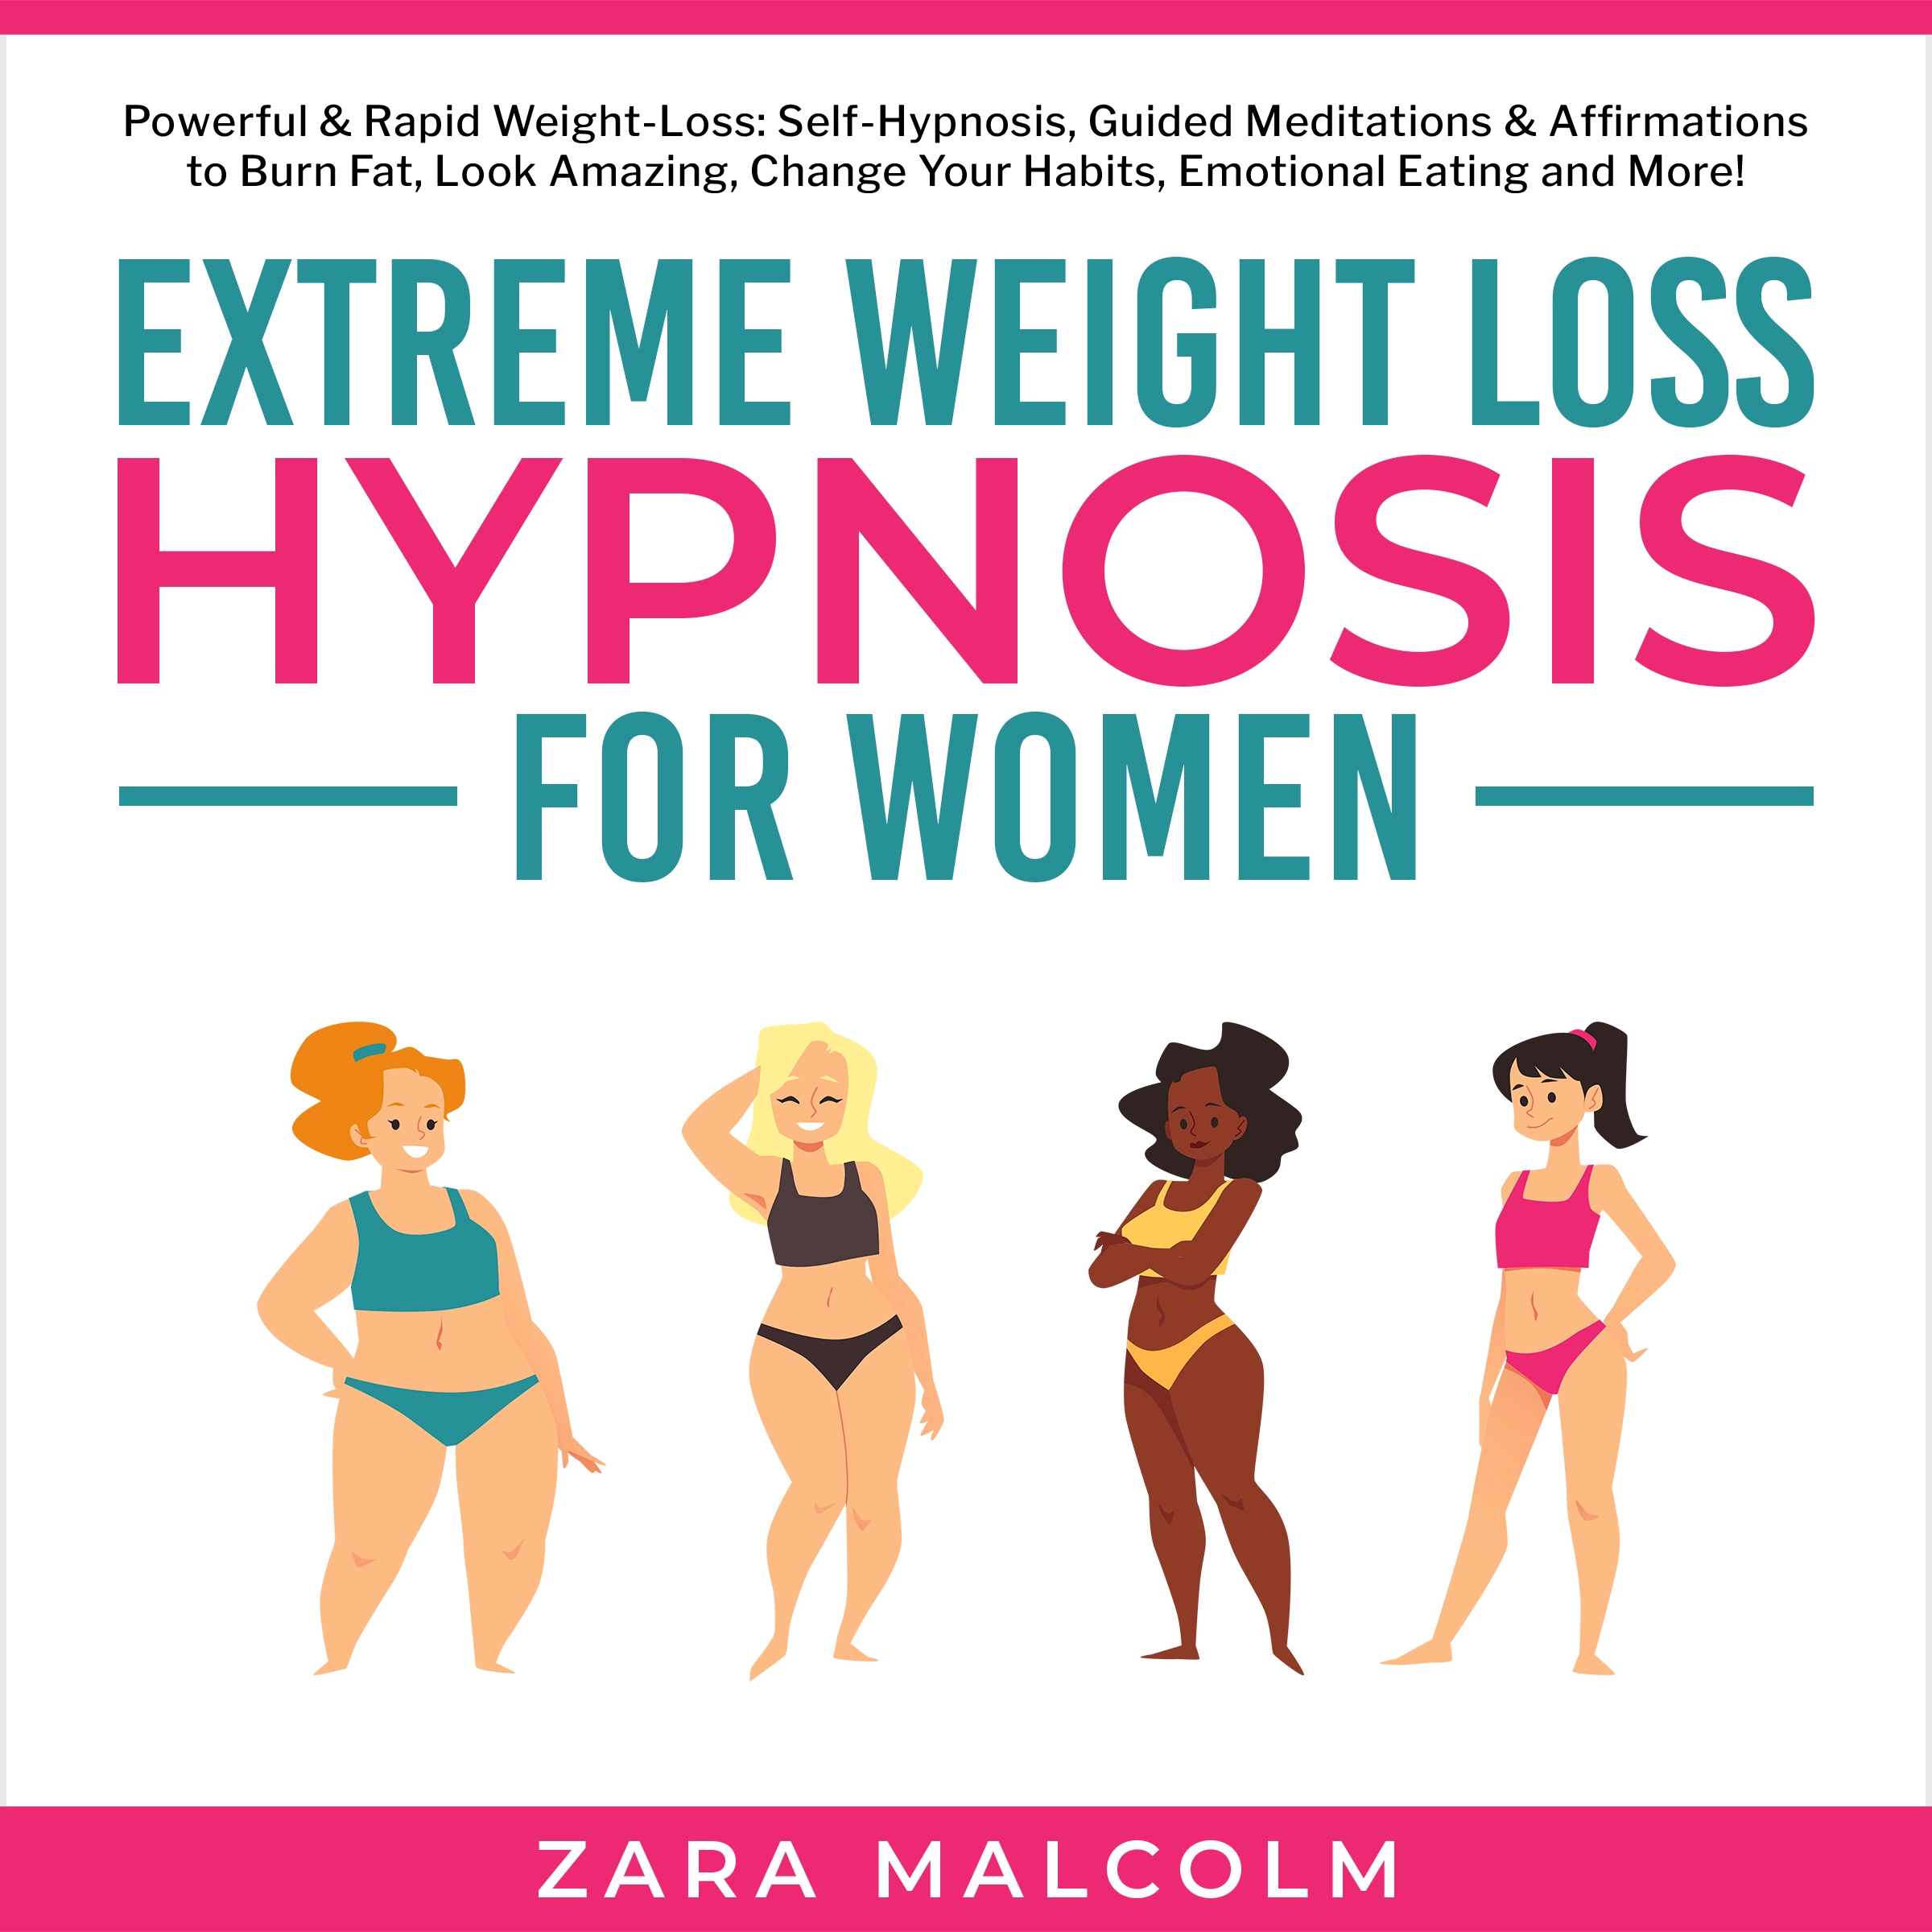 Extreme Weight Loss Hypnosis for Women: Powerful & Rapid Weight-Loss: Self-Hypnosis, Guided Meditations & Affirmations to Burn Fat, Look Amazing, Change Your Habits, Emotional Eating and More. Audiobook by Zara Malcolm